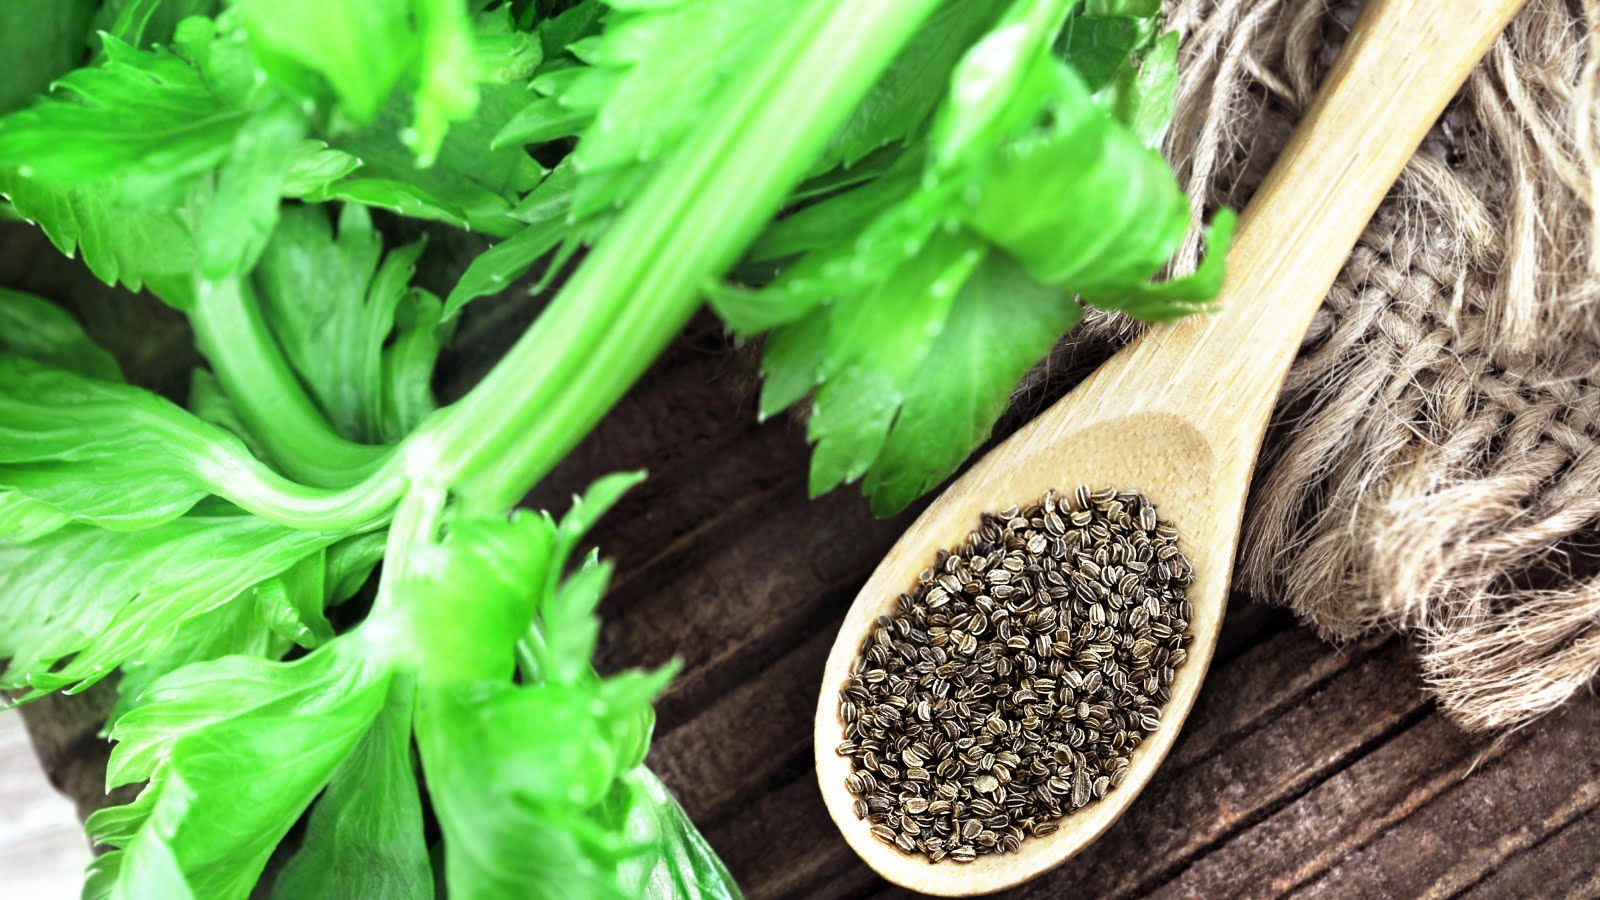 What Do You Use Celery Seed For